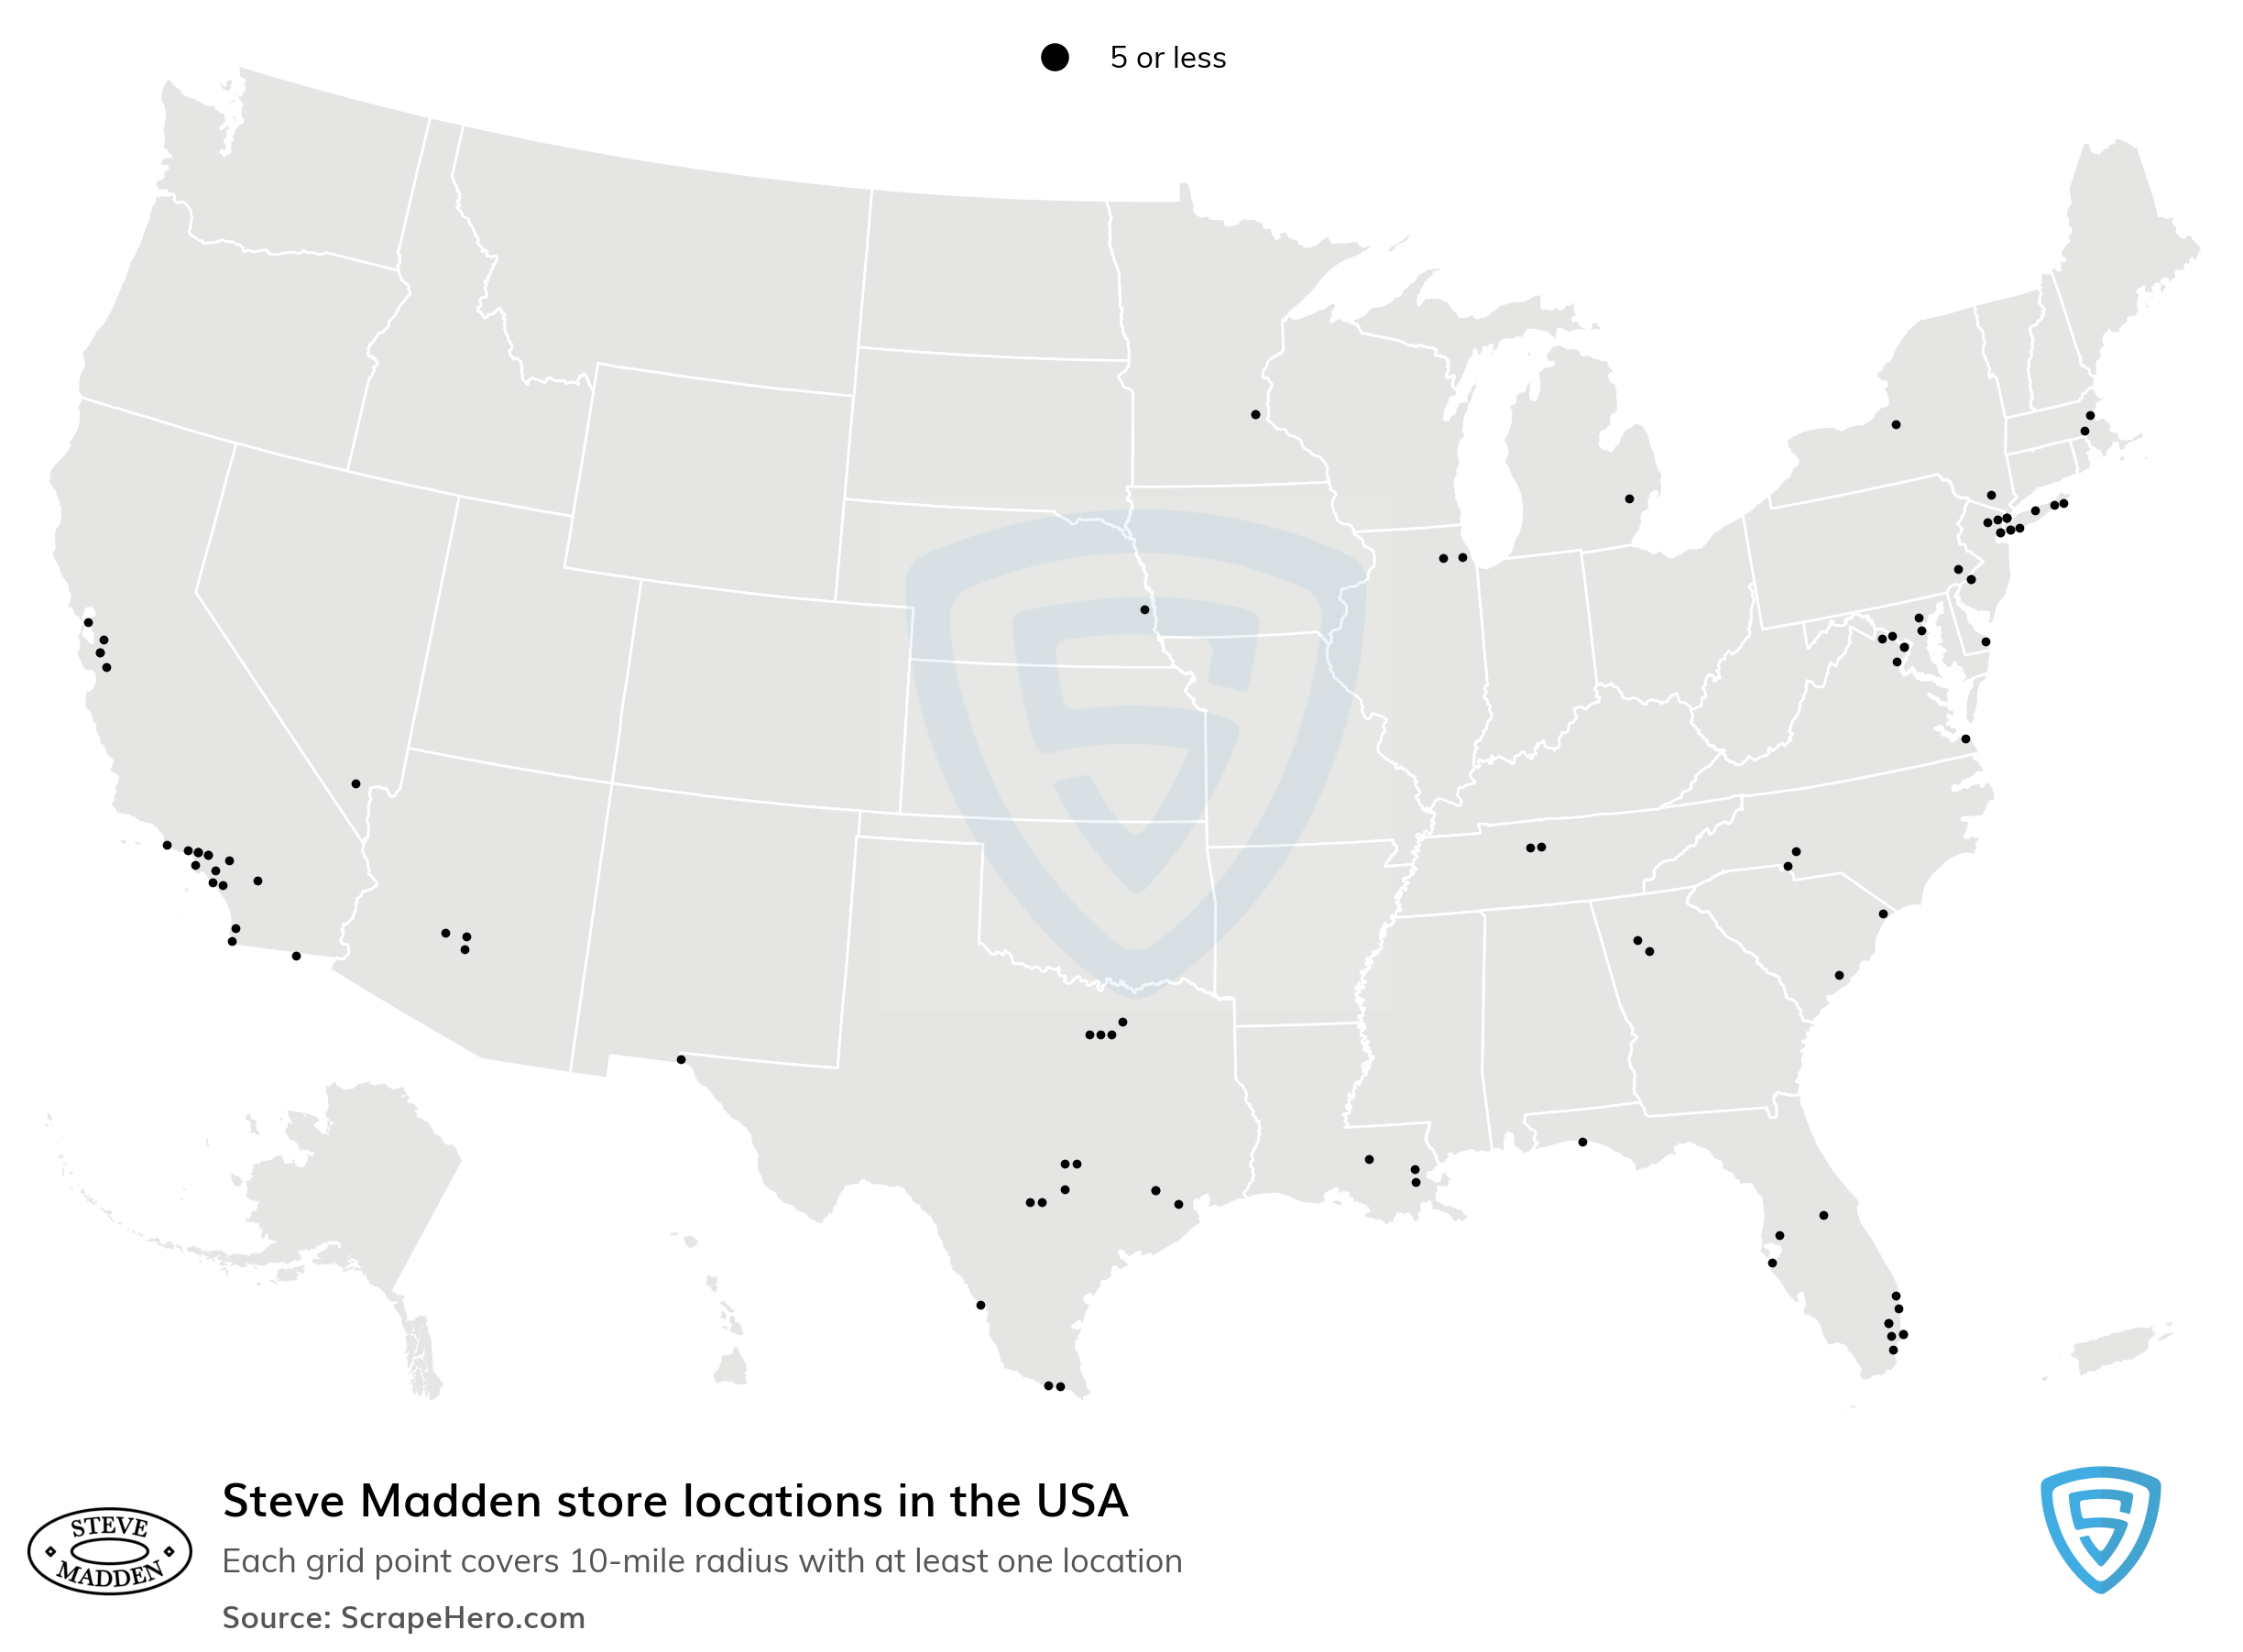 cinta Contribución T Number of Steve Madden locations in the USA in 2022 | ScrapeHero